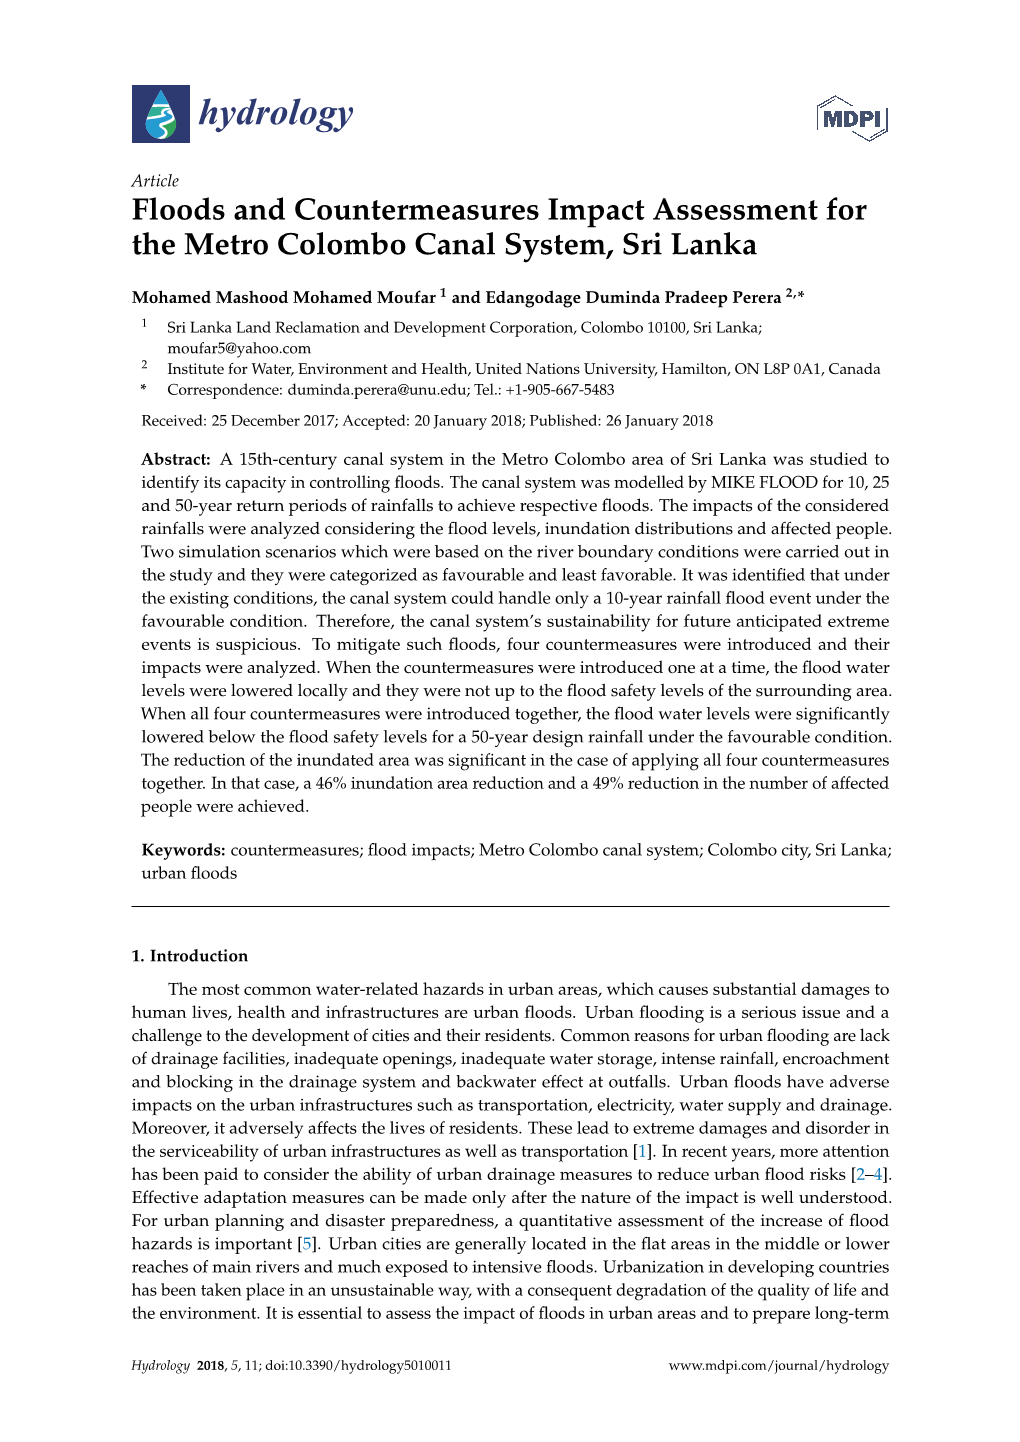 Floods and Countermeasures Impact Assessment for the Metro Colombo Canal System, Sri Lanka